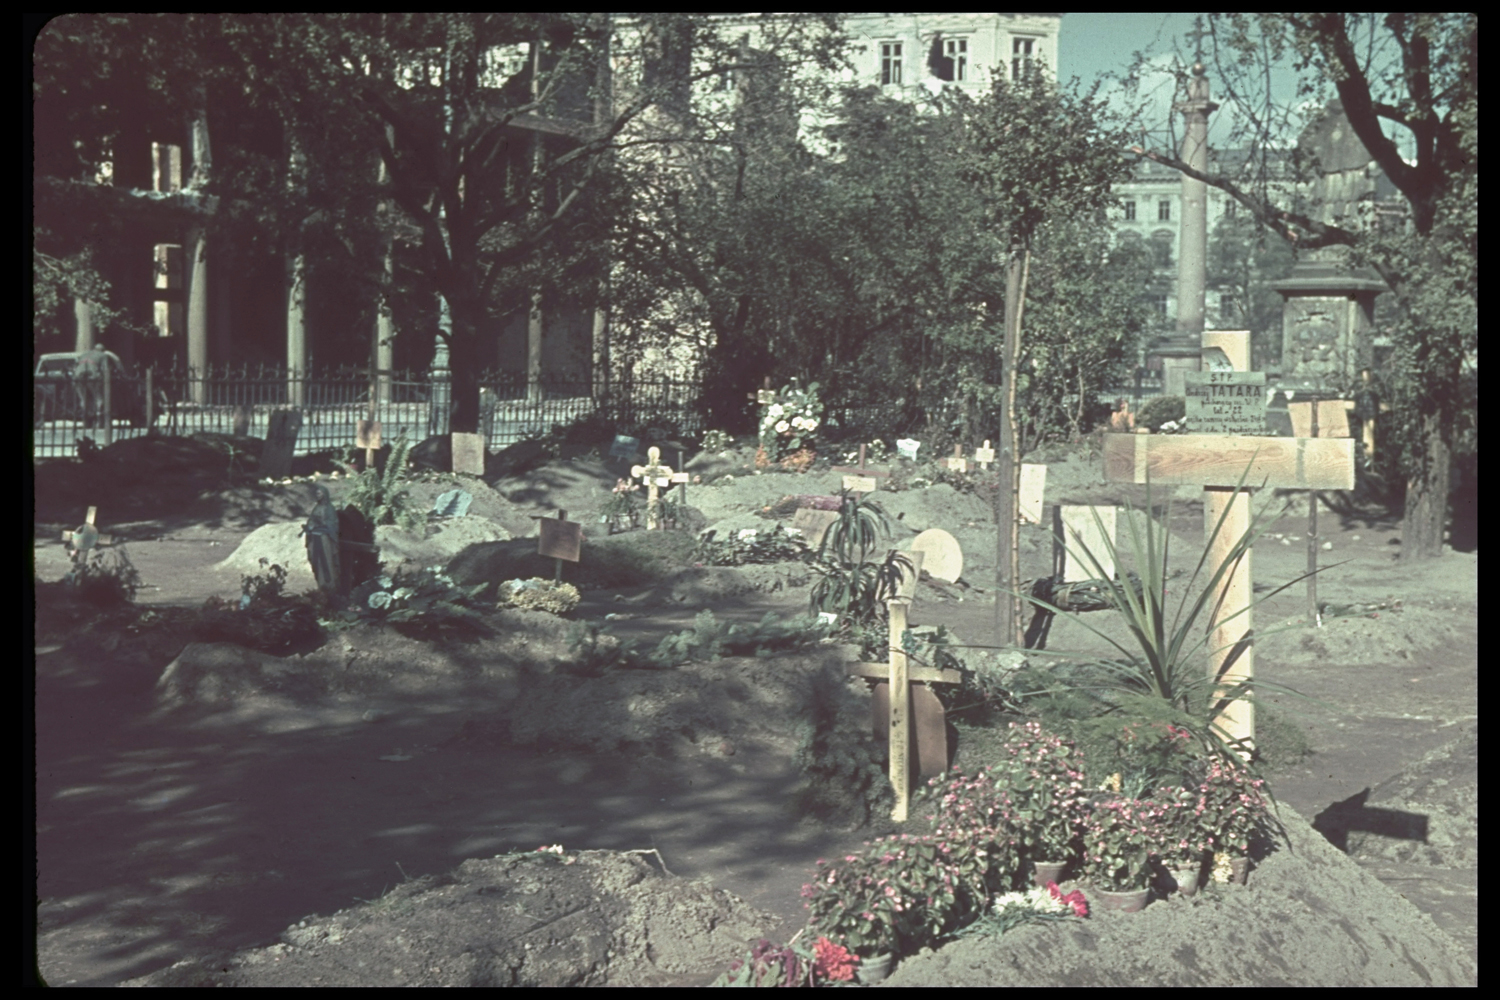 Warsaw citizens buried their dead in parks and streets after the invasion of Poland, 1939.